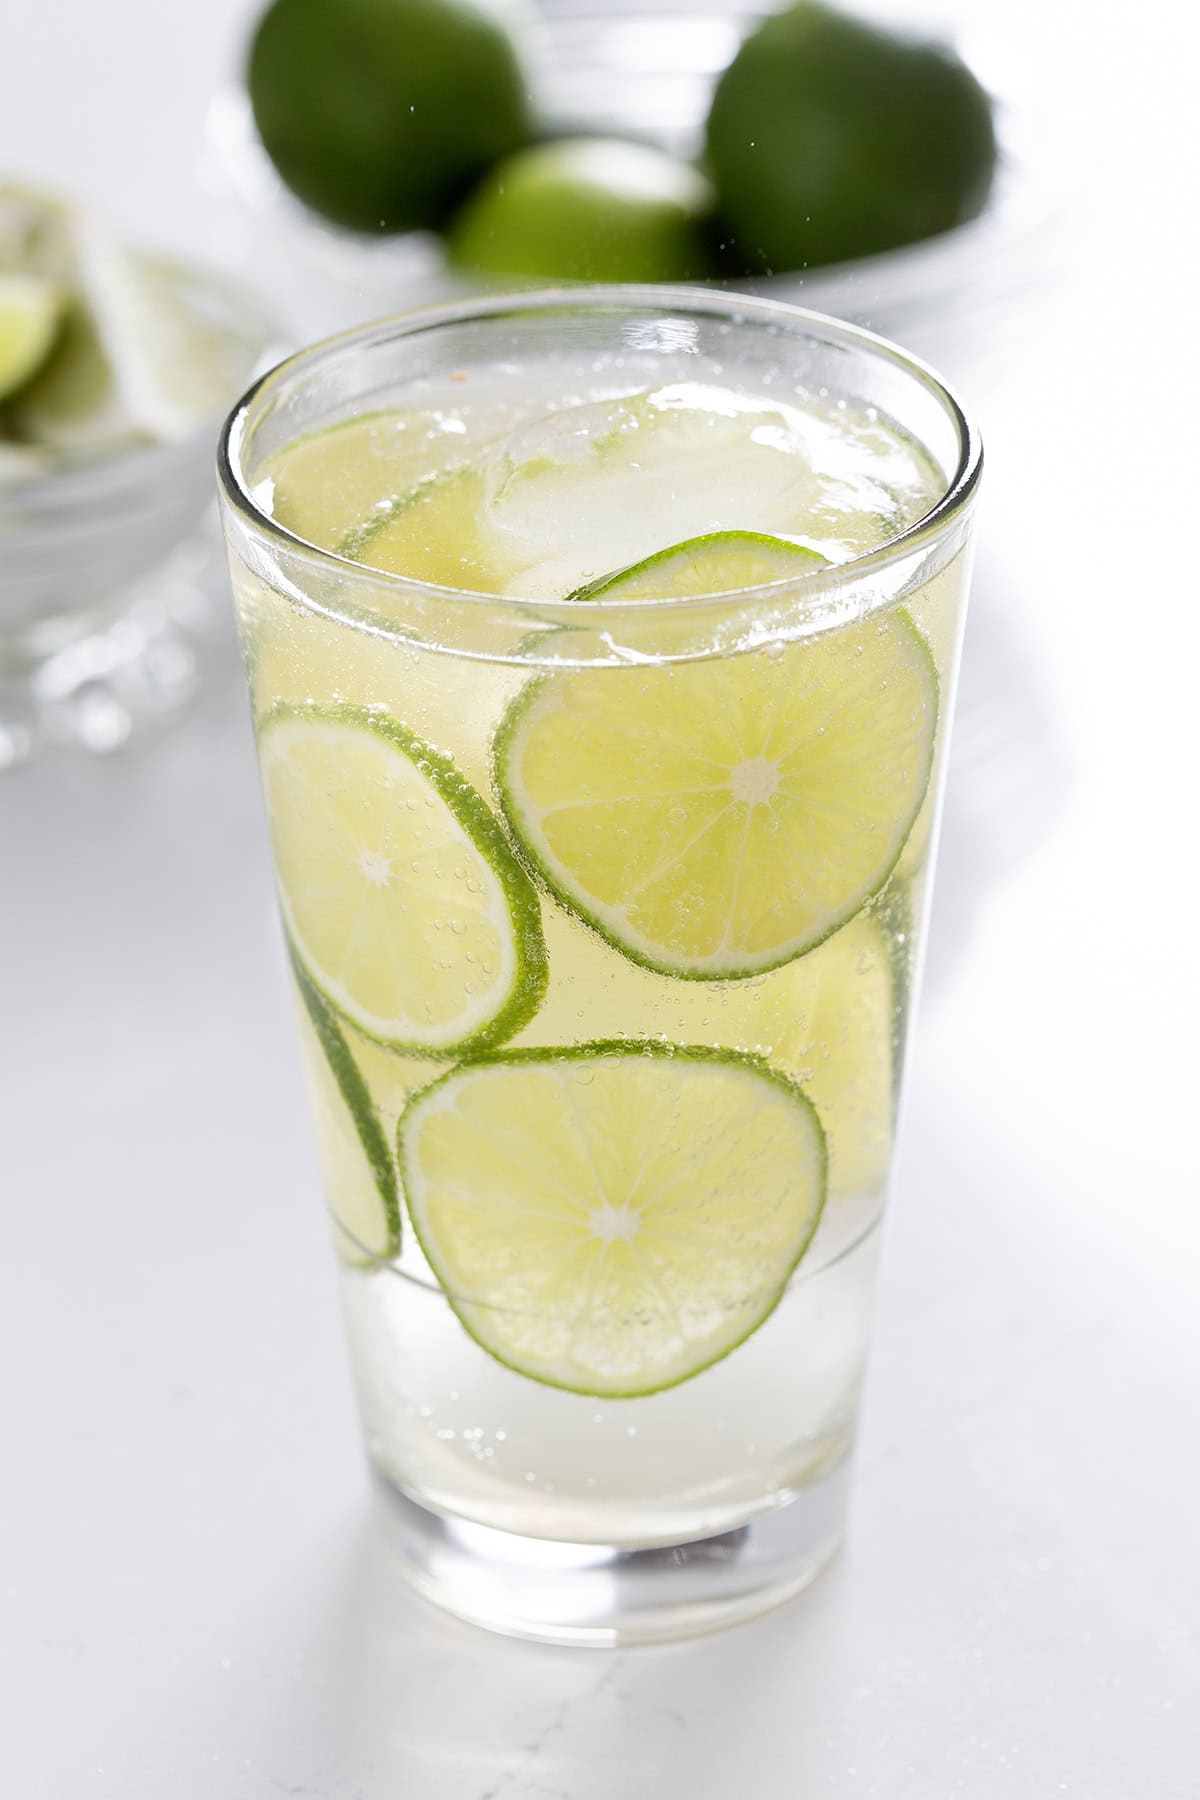 highball glass fill with tequila and soda with lime wheels garnish